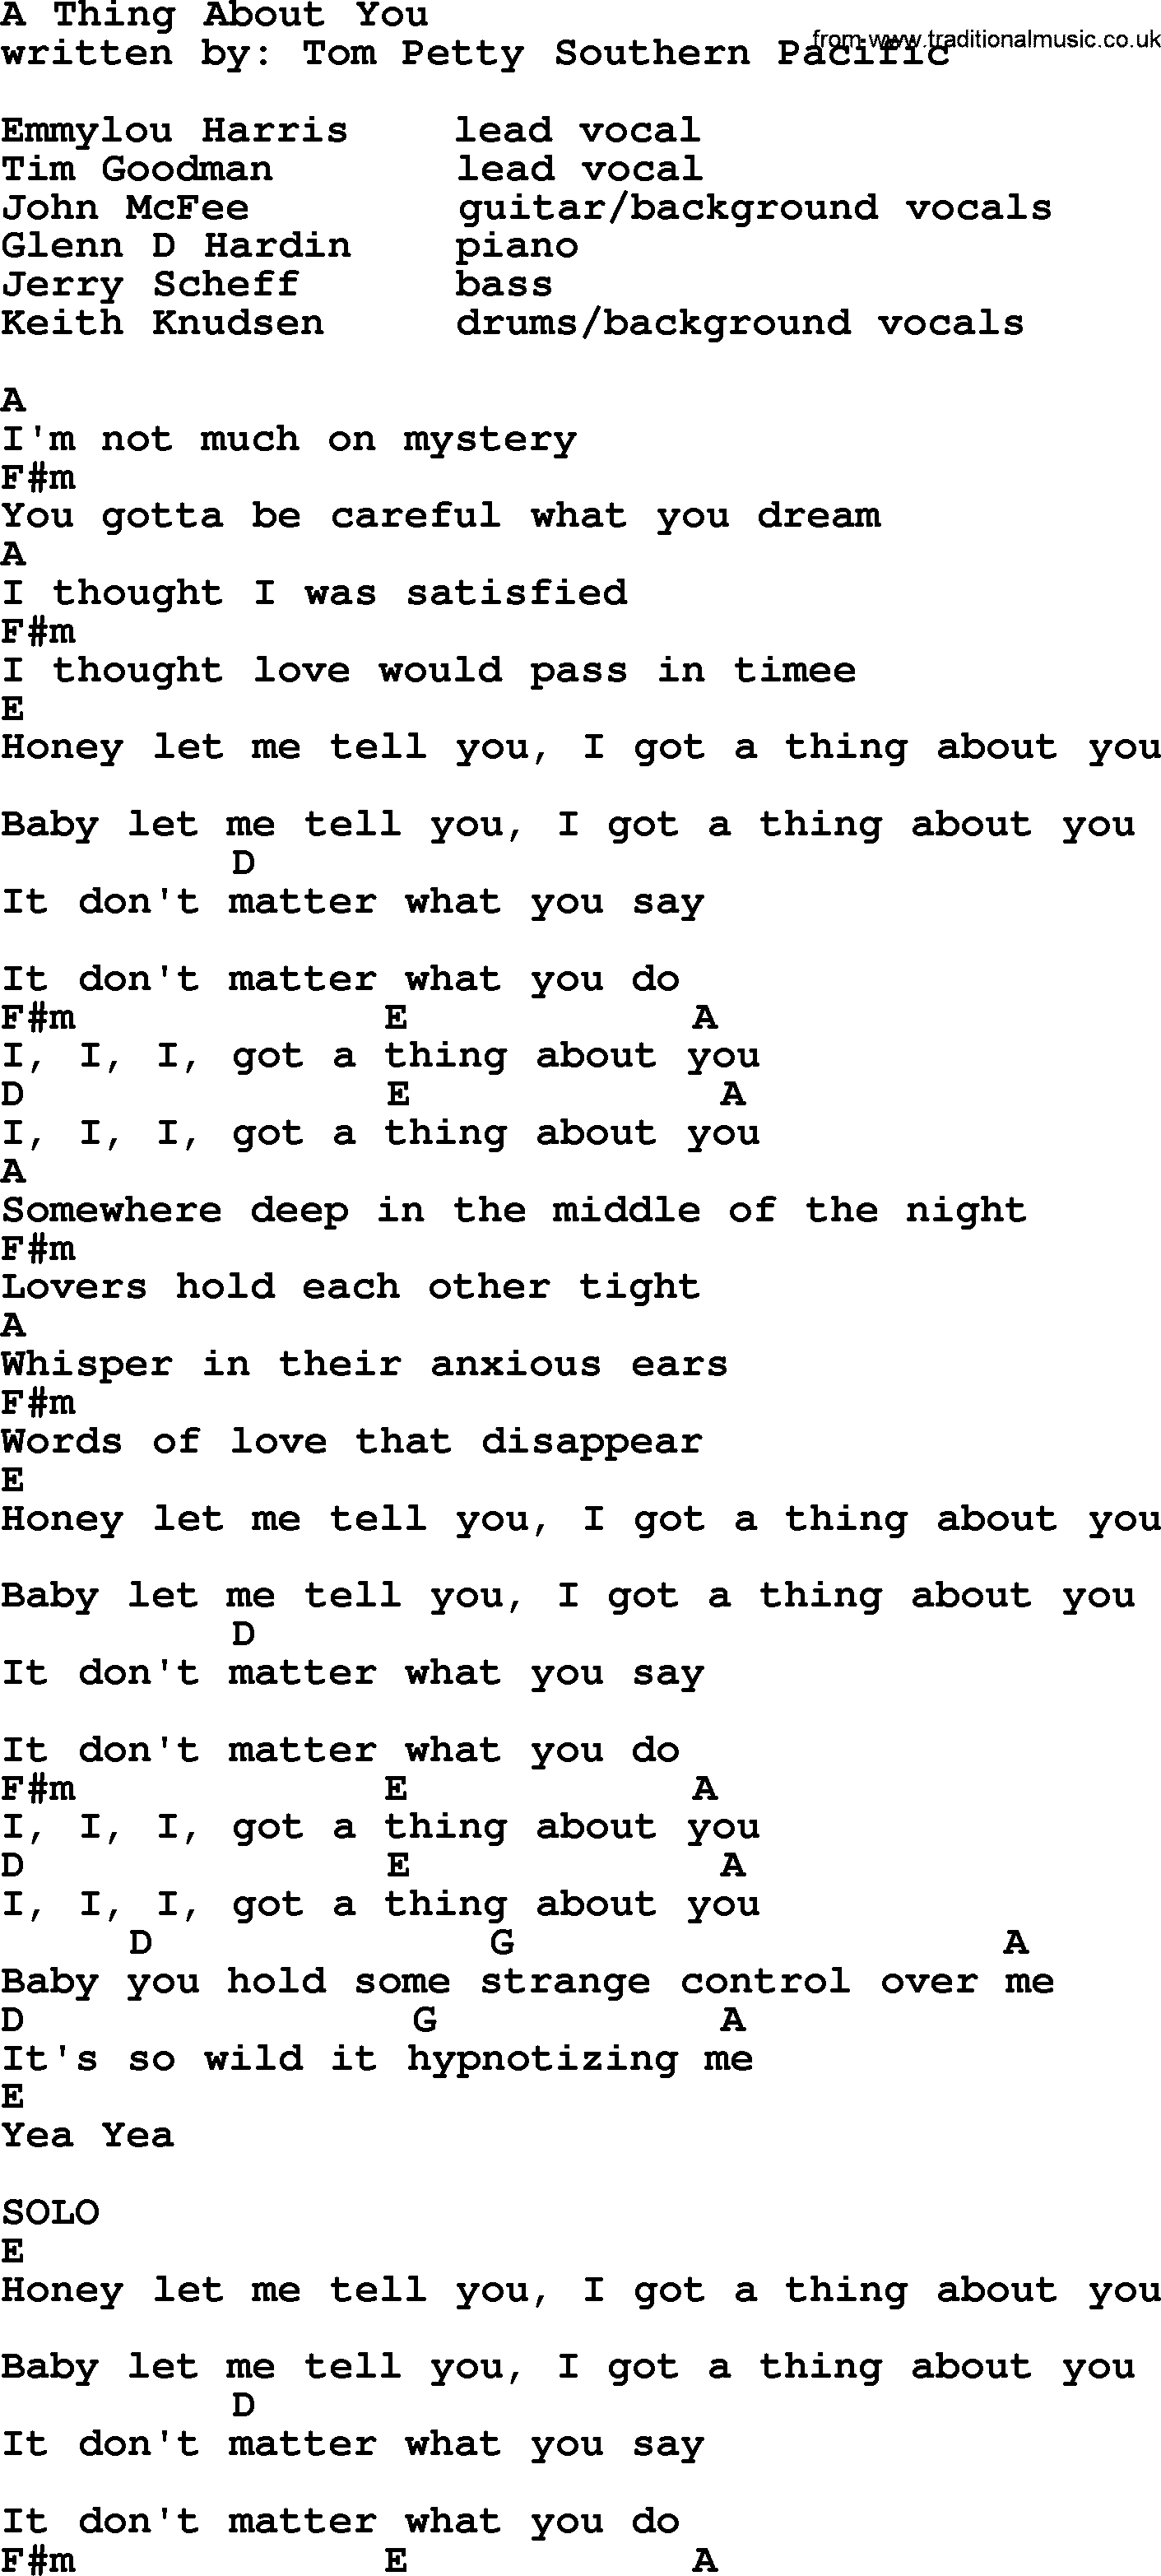 Emmylou Harris song: A Thing About You lyrics and chords